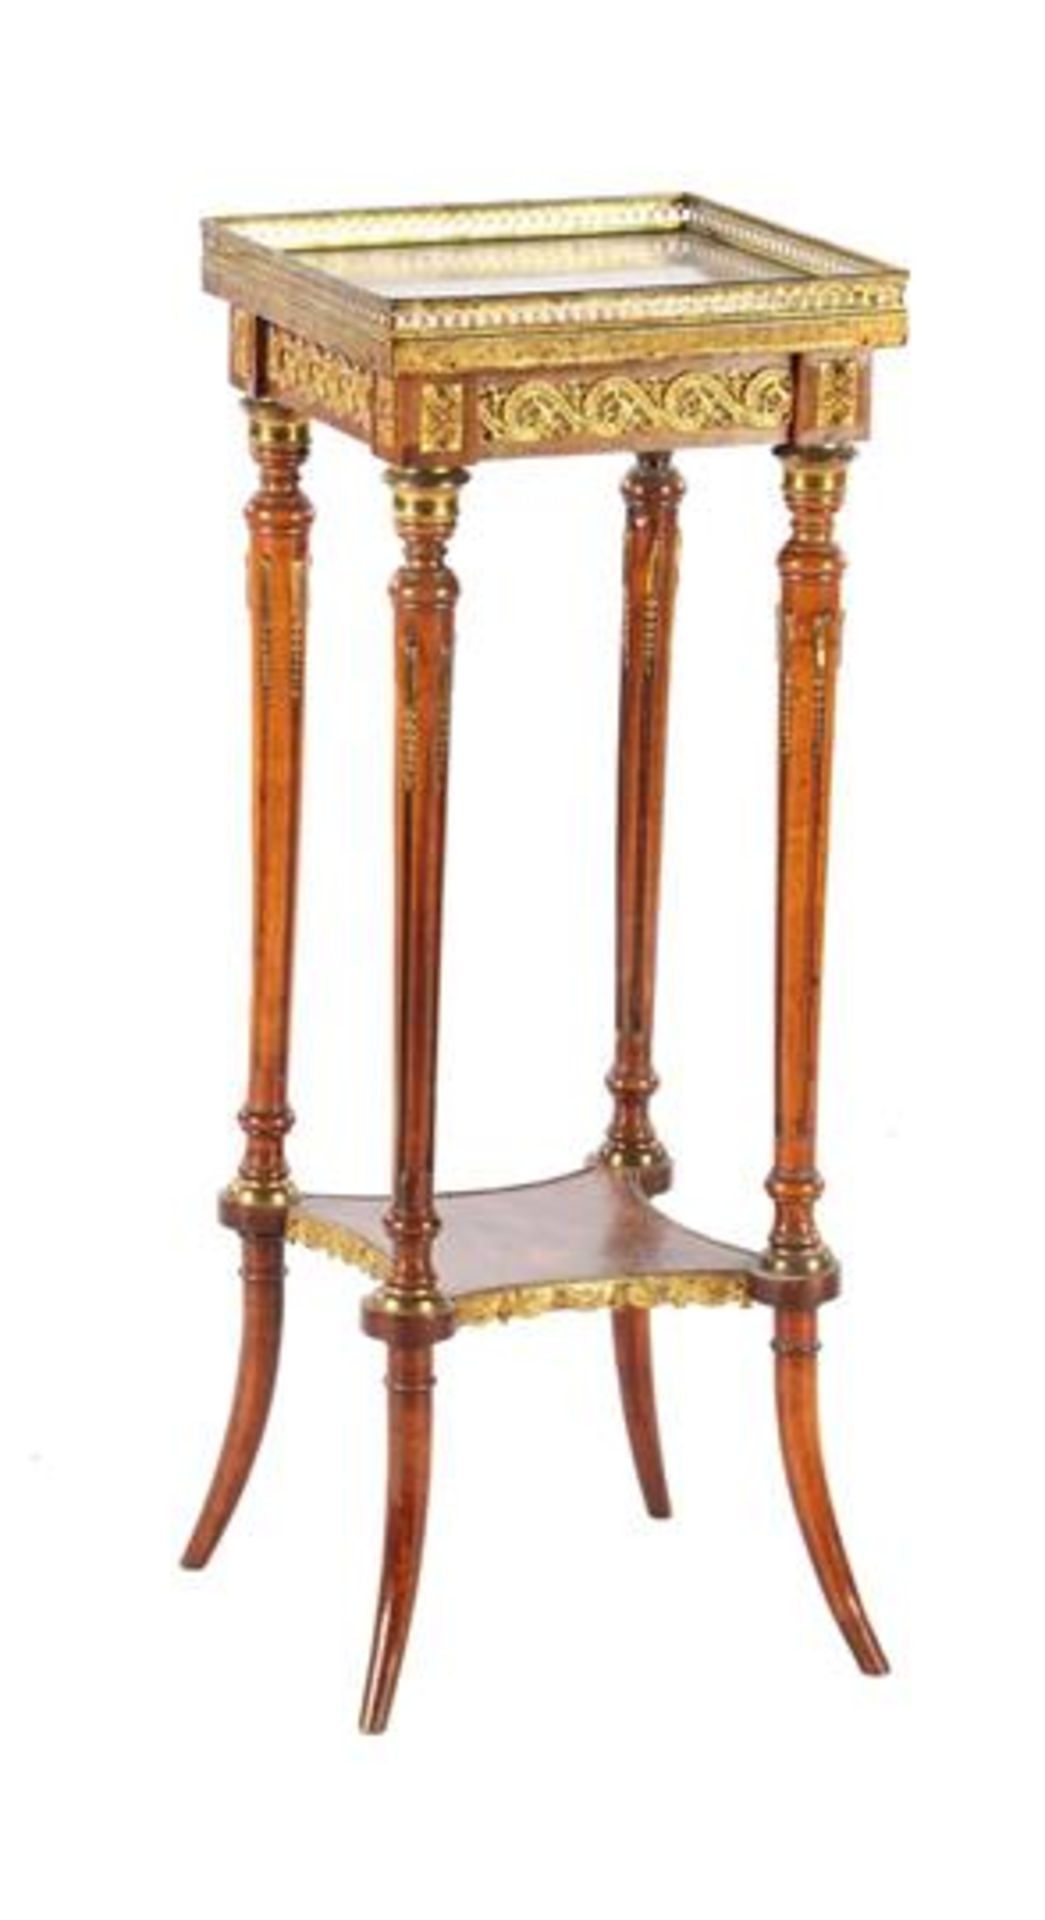 Walnut Louis Seize style gueridon with brass fittings and ornaments 80.5 cm high, 30.5x30.5 cm